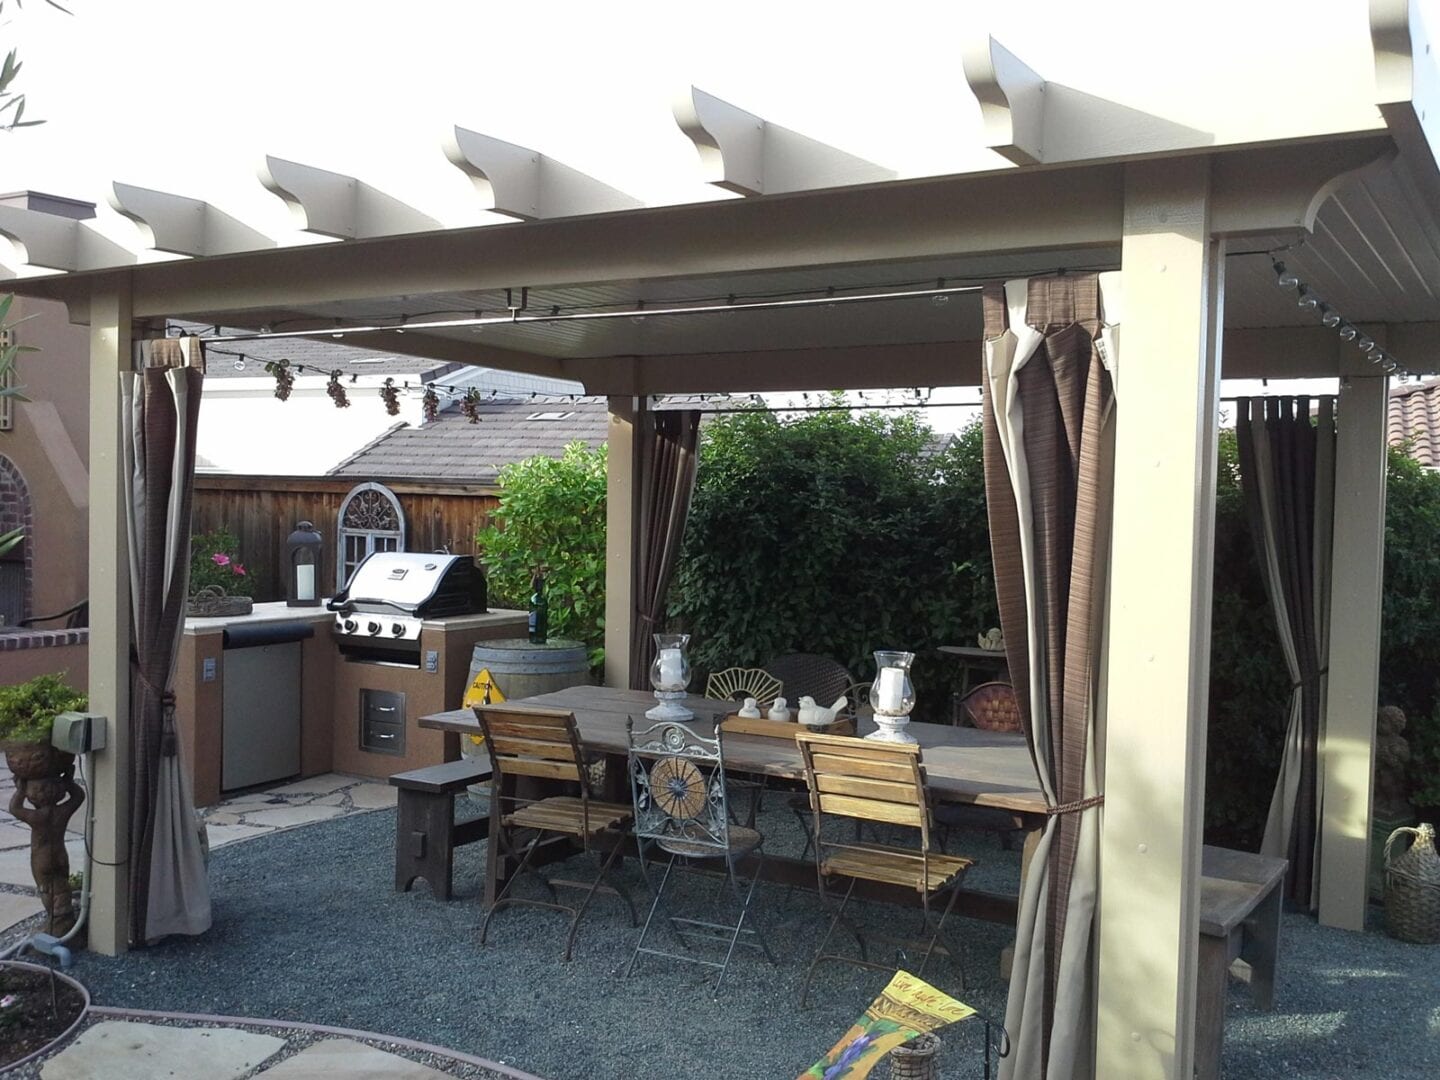 A patio with a grill area